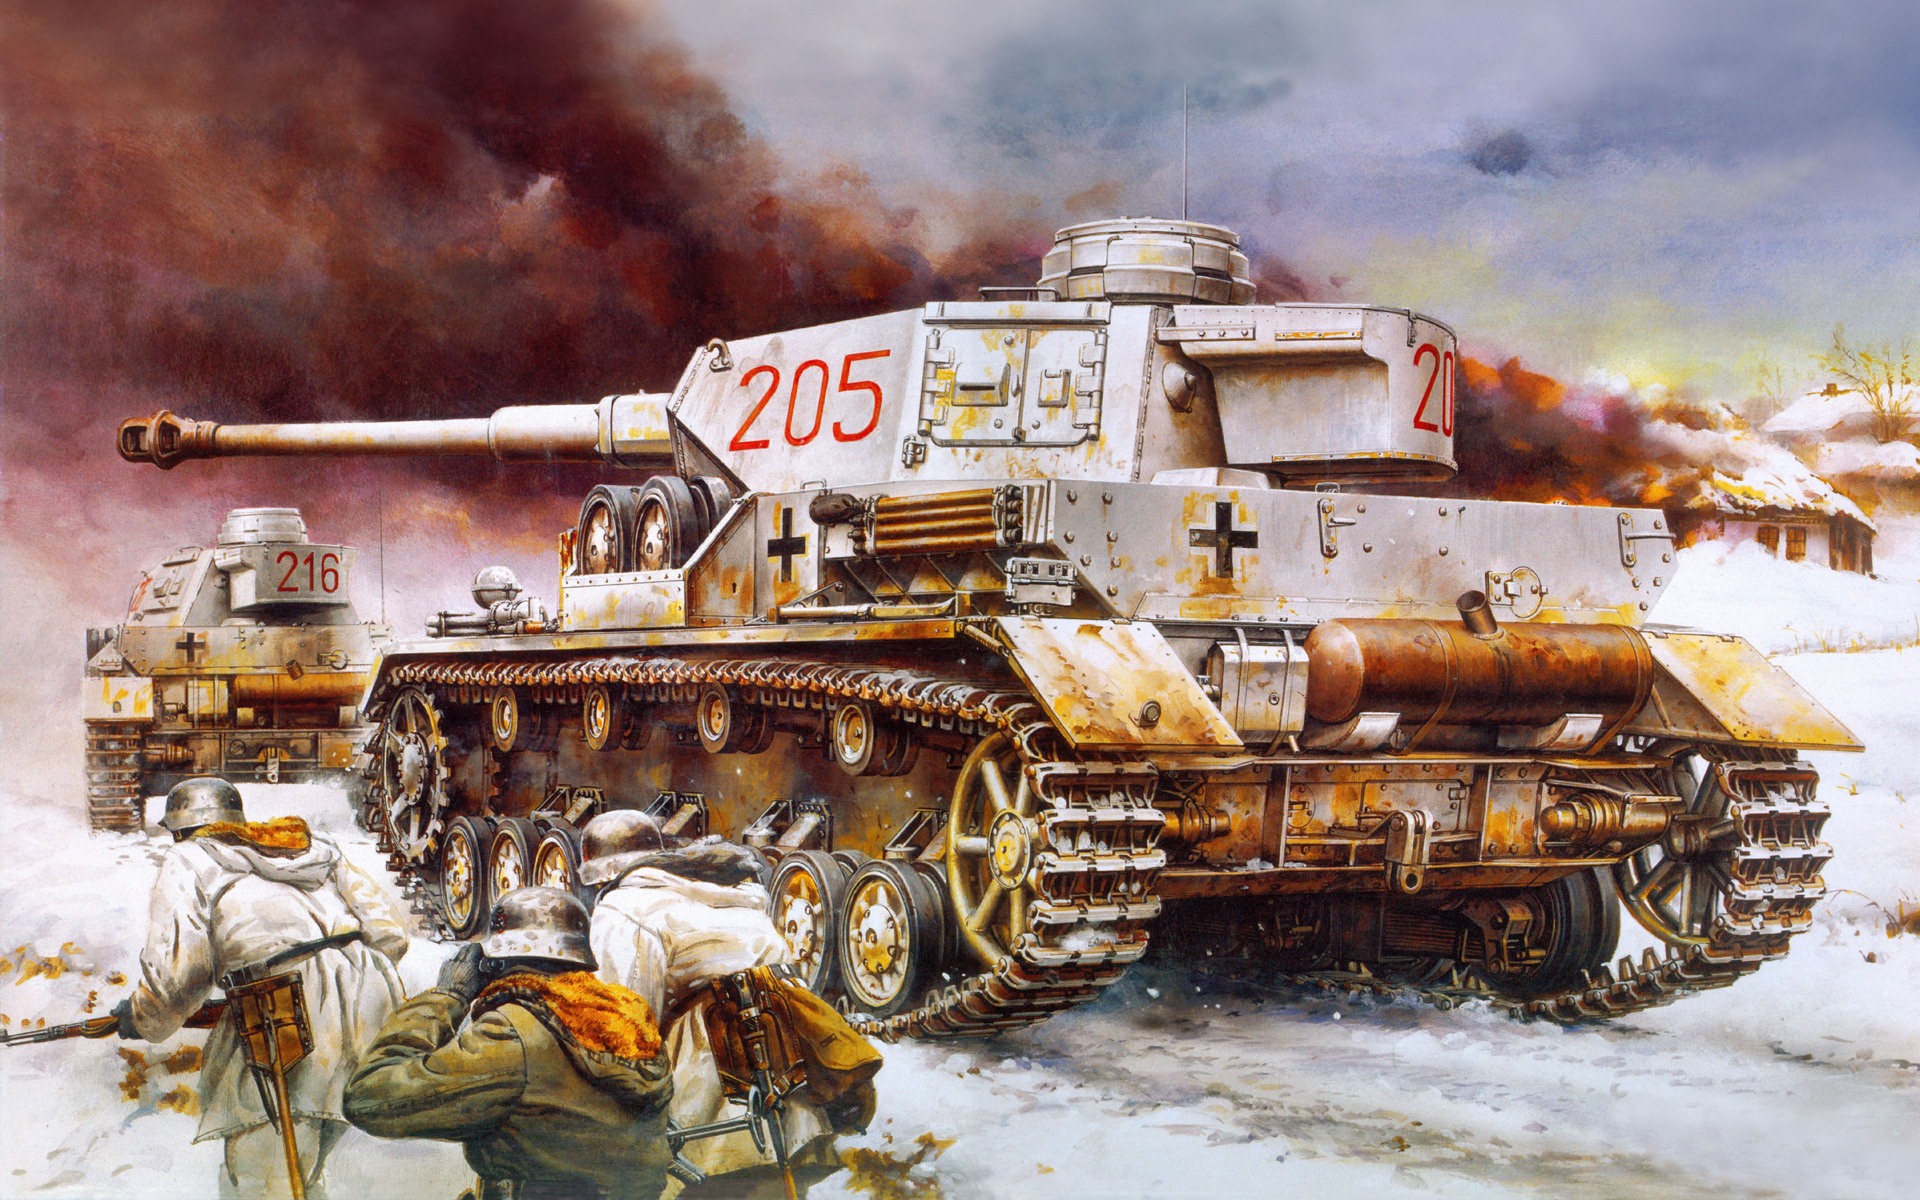 Military tanks, armored HD painting wallpapers #15 - 1920x1200